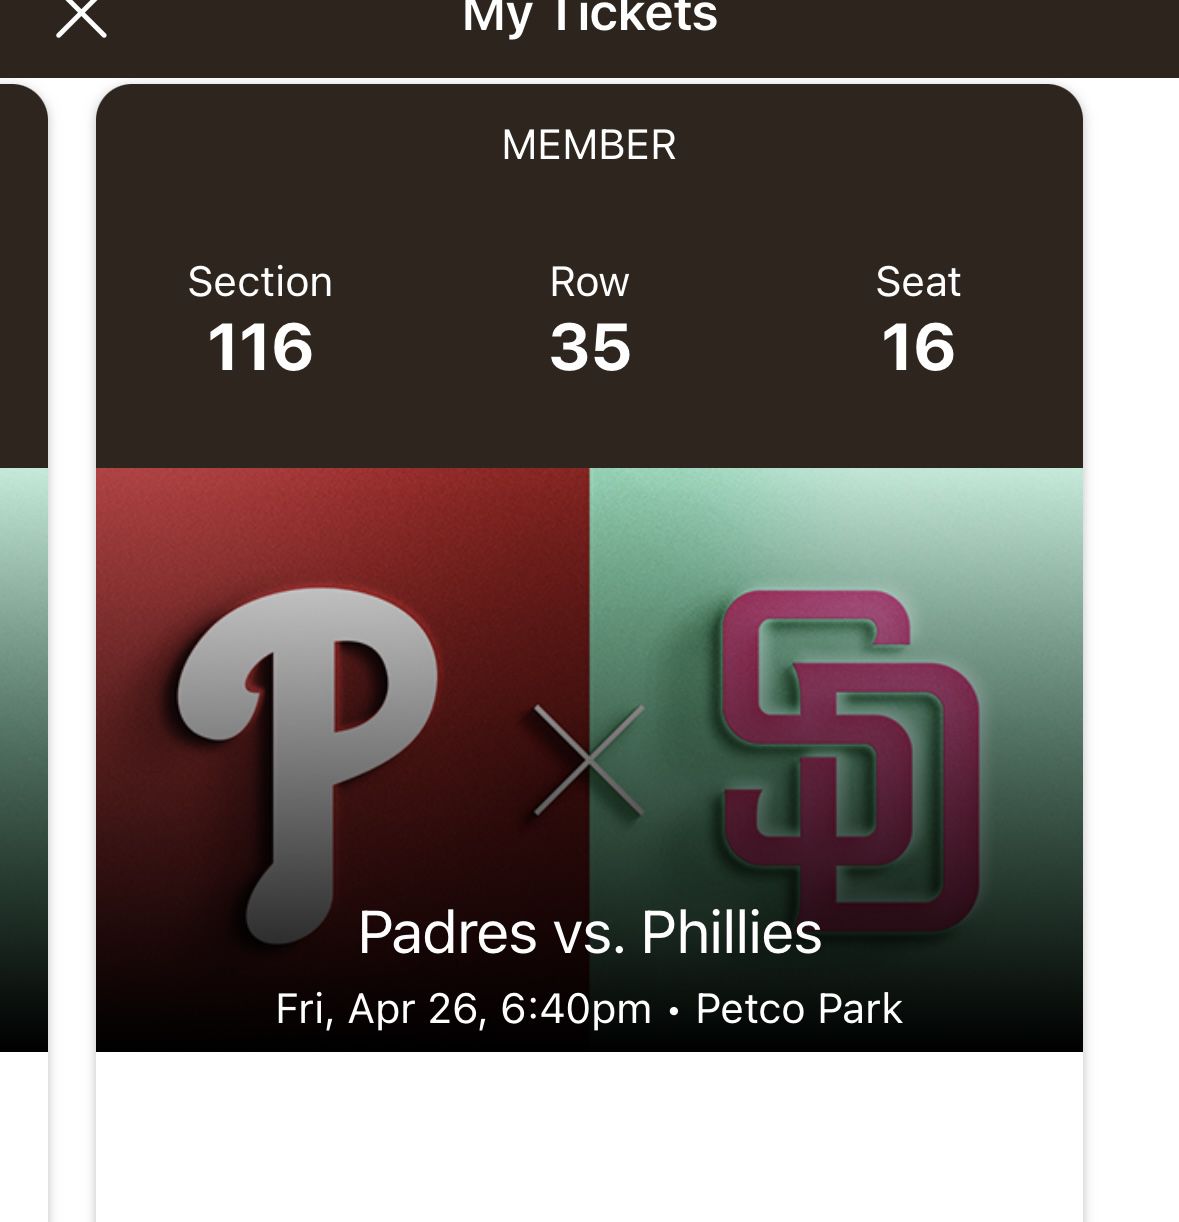 Padres Vs Phillies Friday 4/27